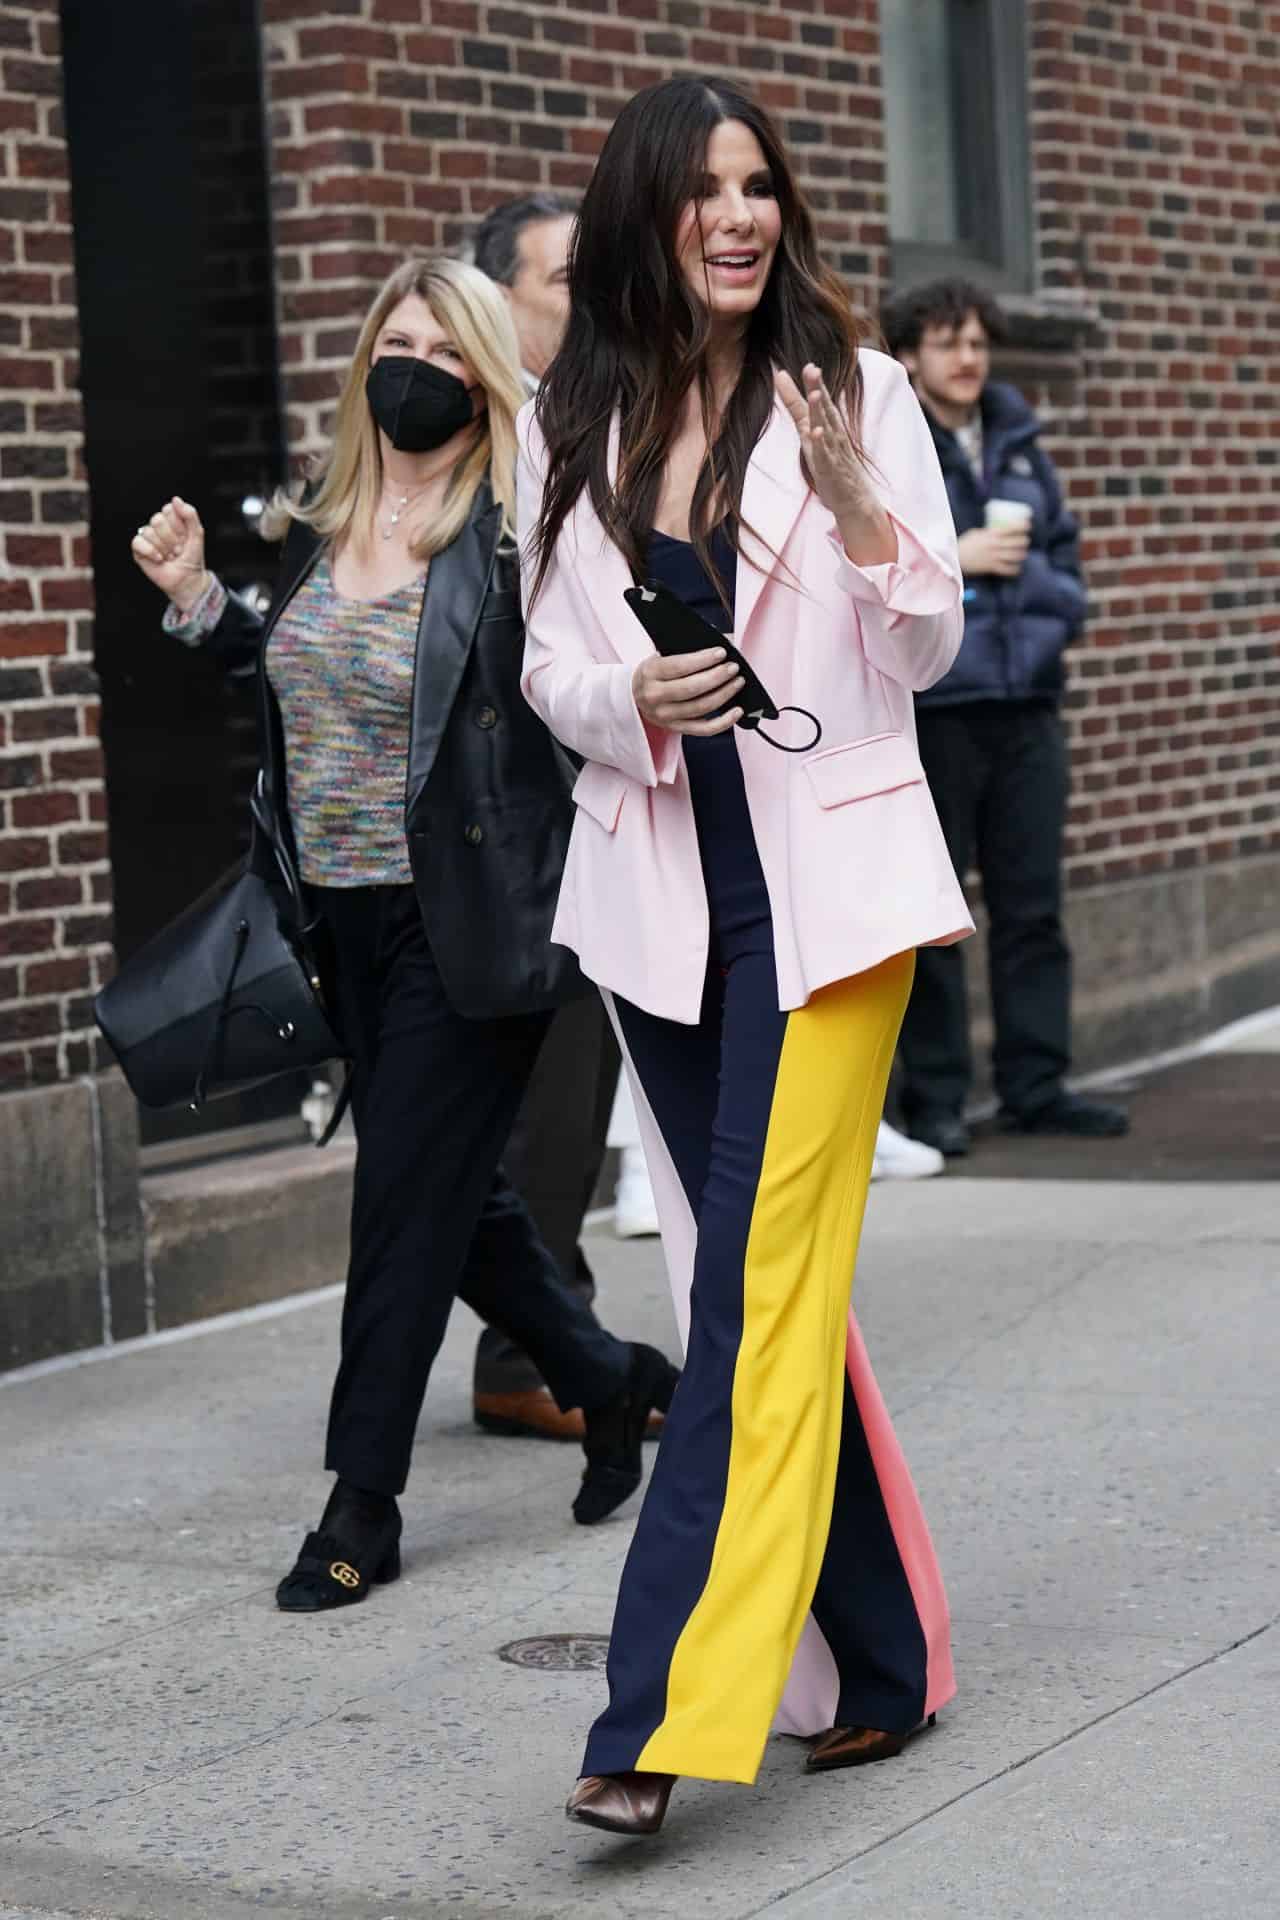 Sandra Bullock Looking Chic Ahead of her "The Late Show" Appearance in NY